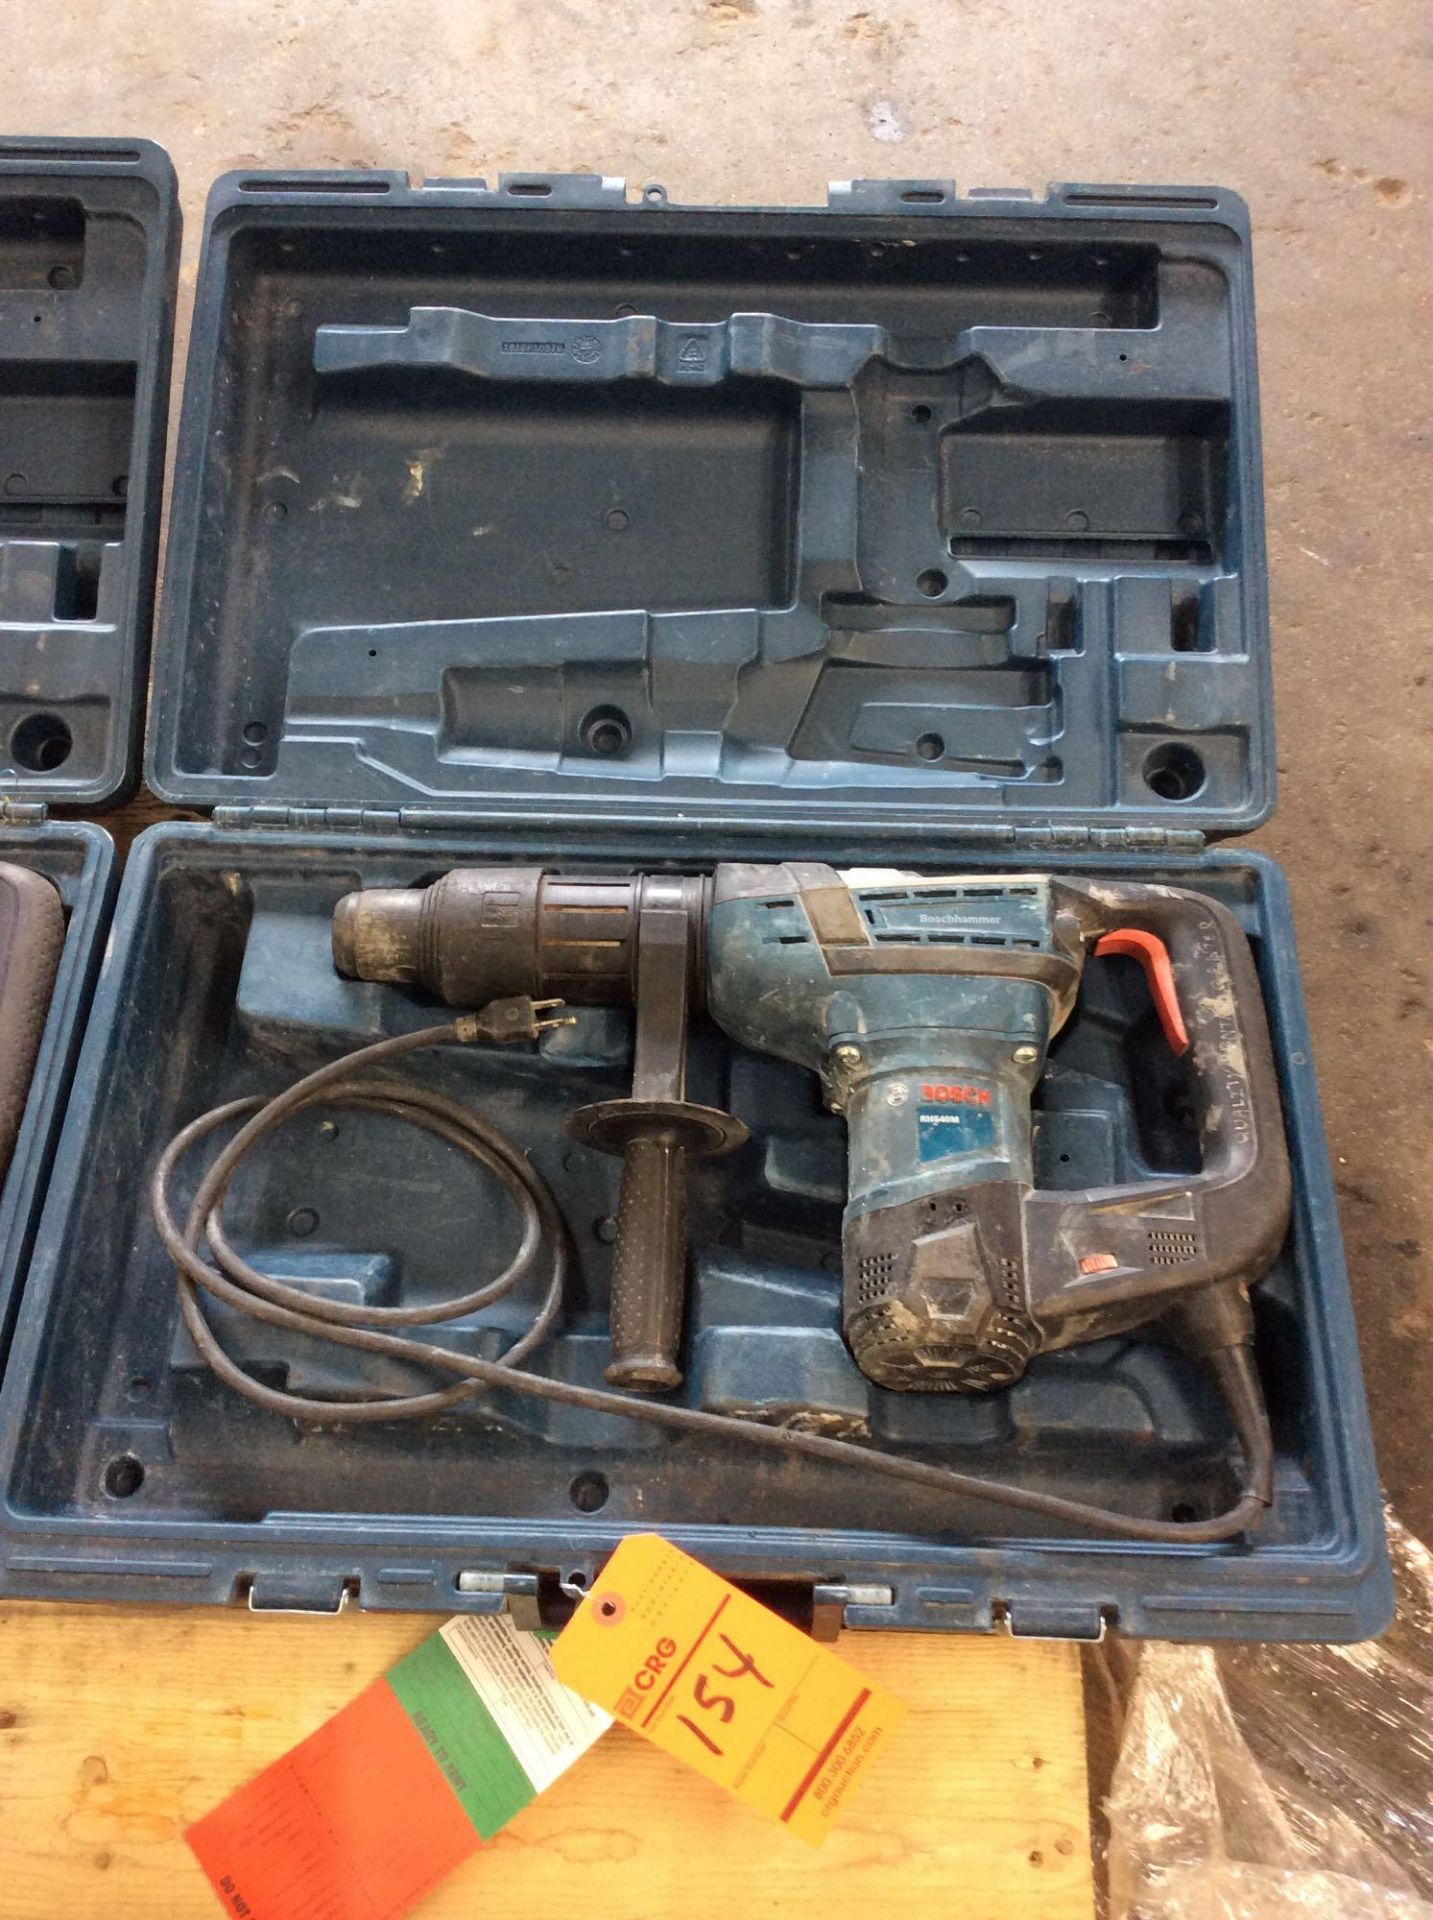 Lot of (2) Bosch Hammer drills, mn RH540M with cases, both turn slowly